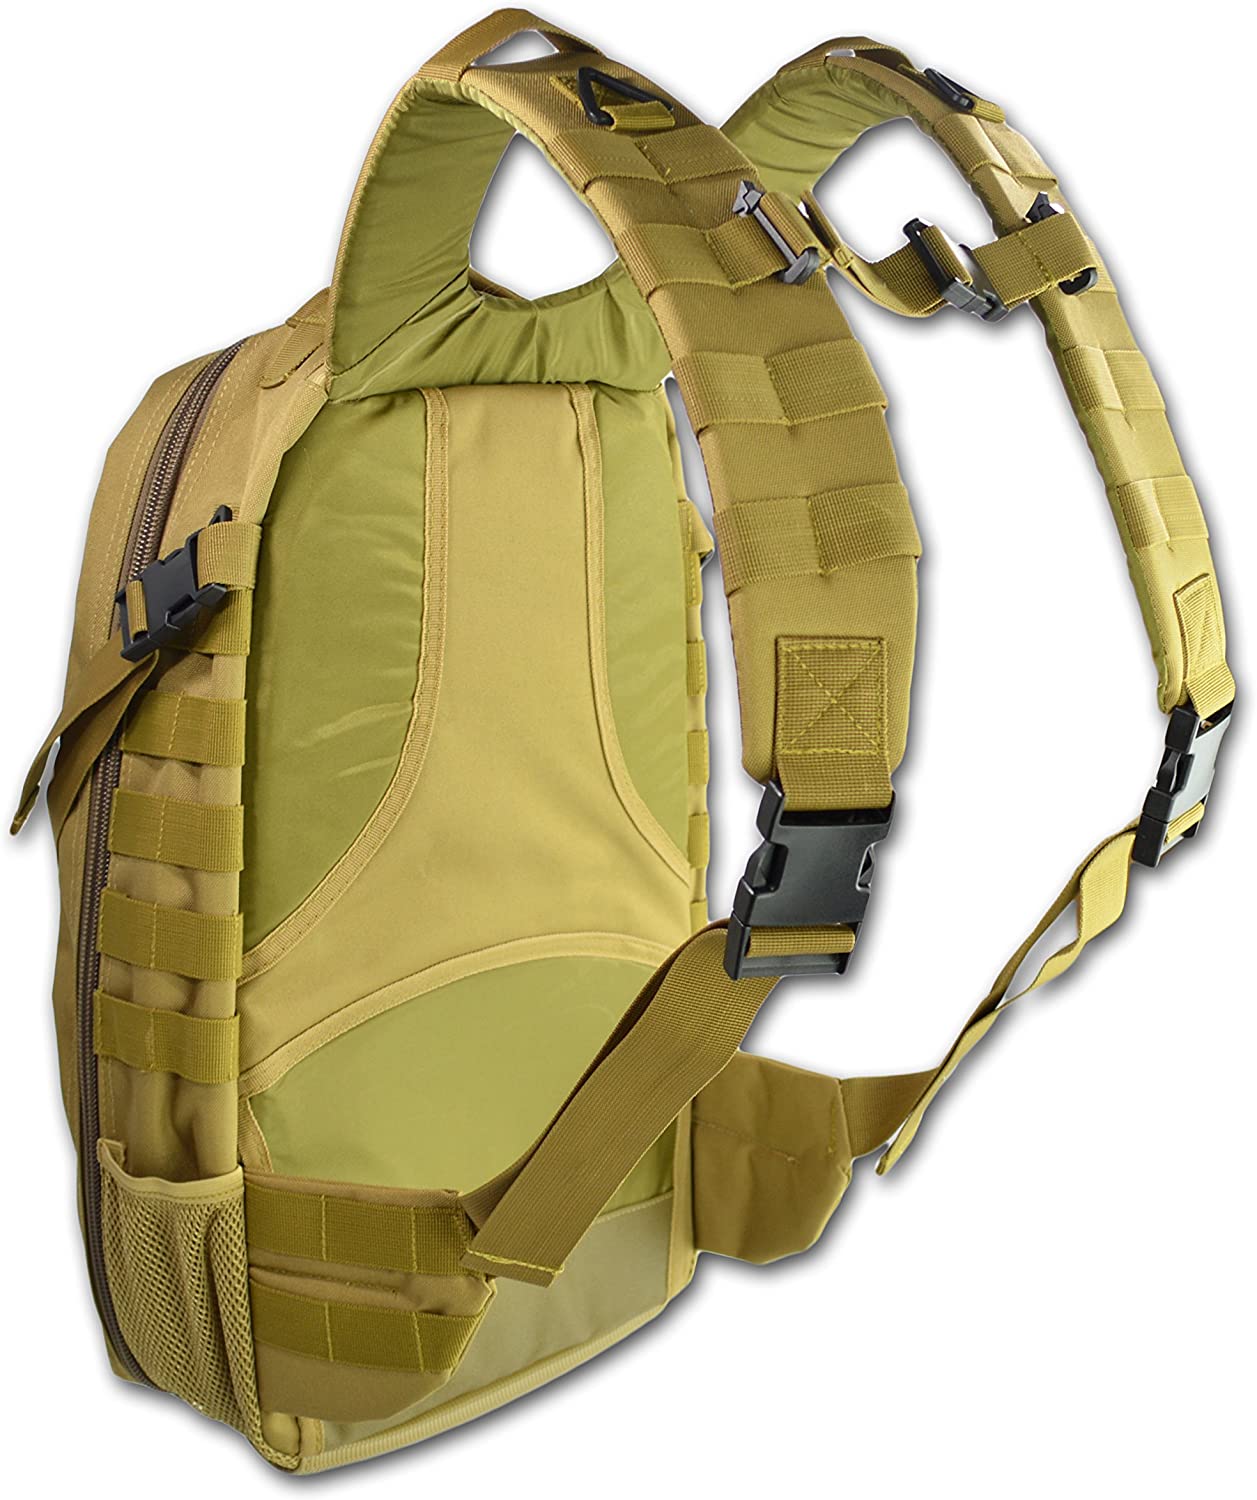 Lightning X Premium Tactical Medic Backpack w/ Modular Pouches & Hydration Port - image 2 of 8